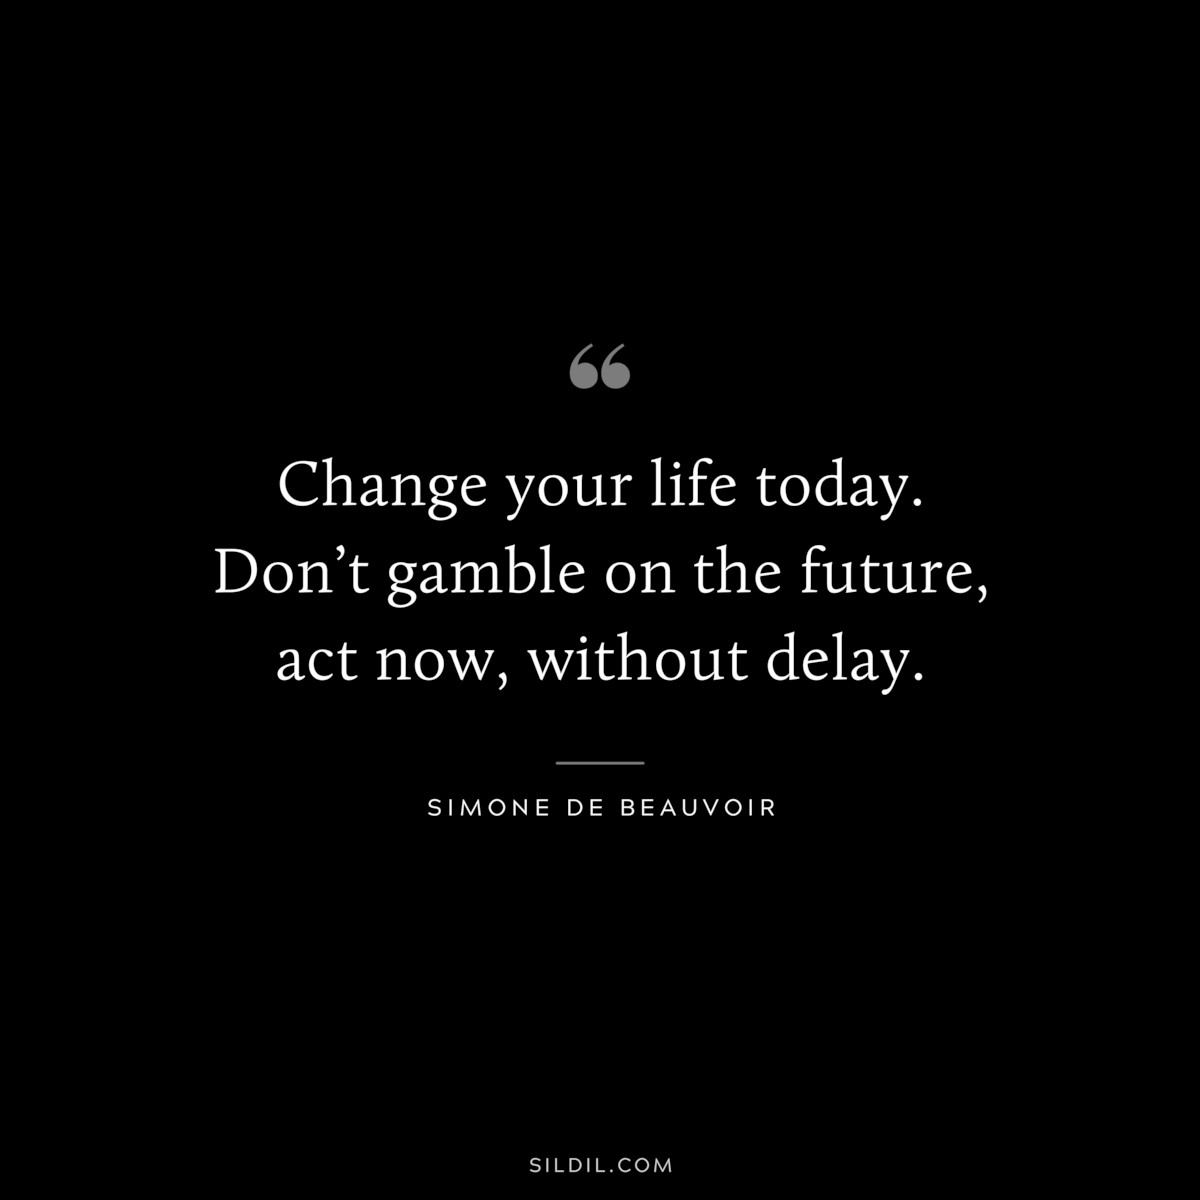 Change your life today. Don’t gamble on the future, act now, without delay. ― Simone de Beauvoir